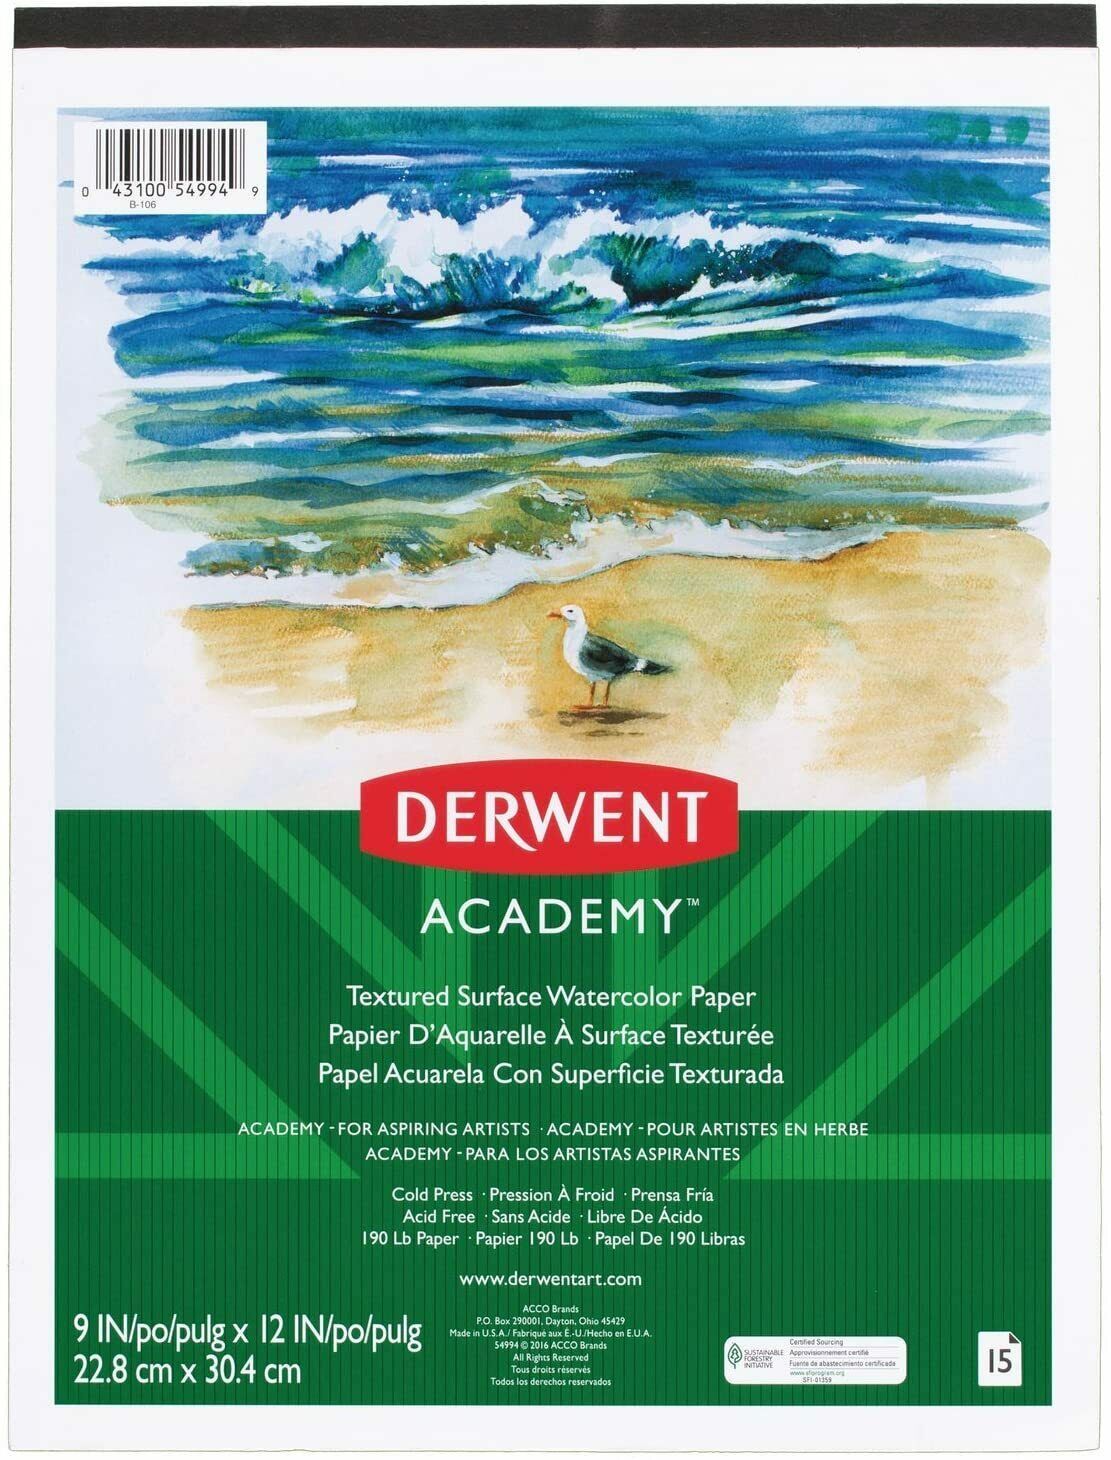 Derwent Academy Textured Surface Watercolor Paper Pad 15 Sheets 9" x 12" (54994) - $10.99